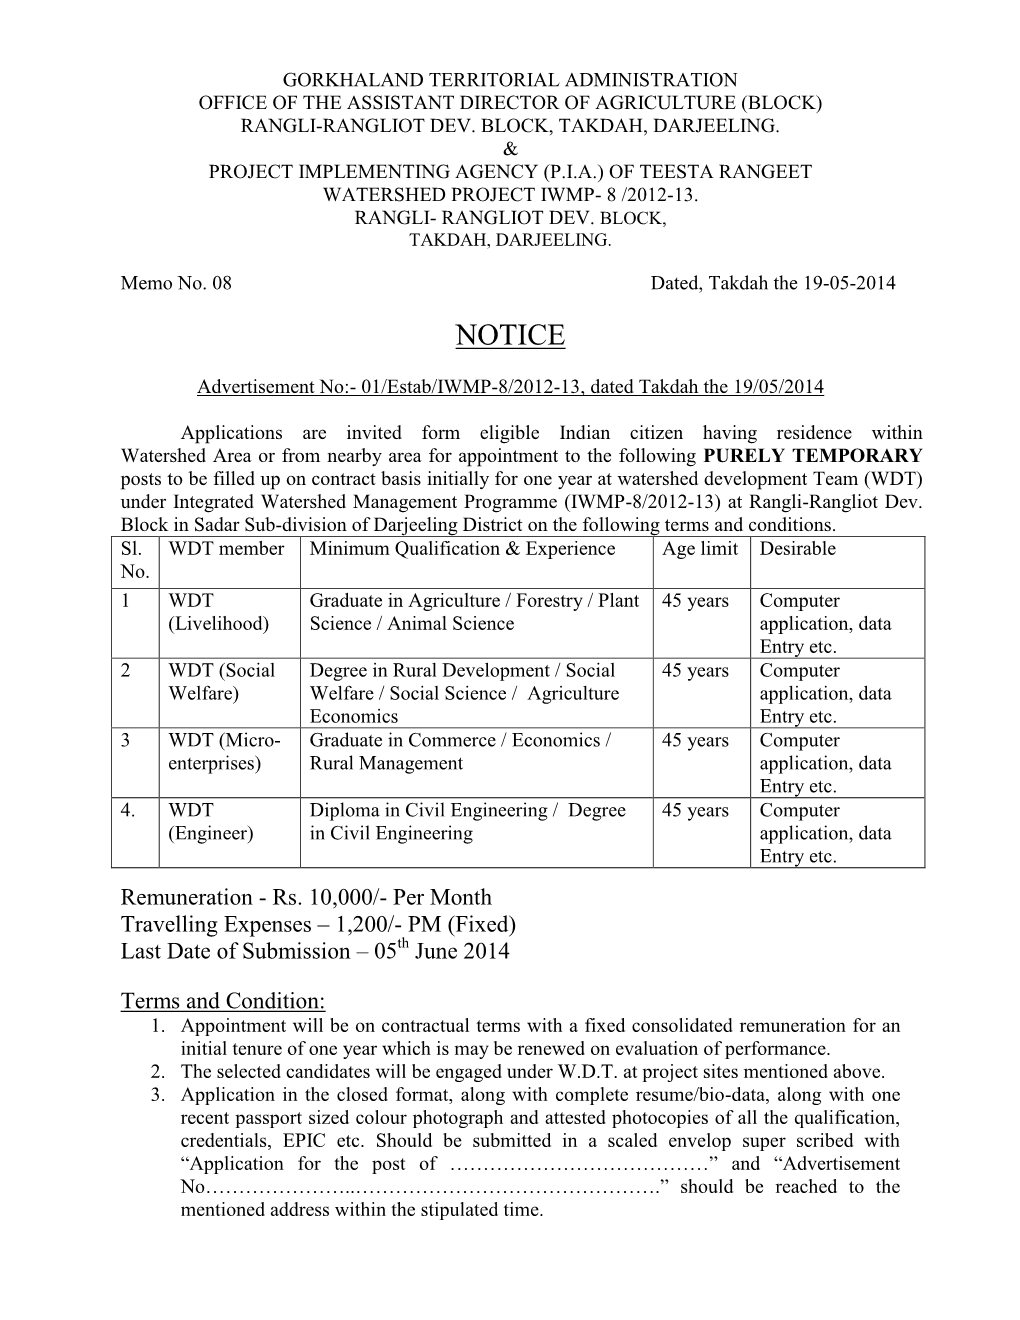 Advertisement & Application from for Recruitment of WDT